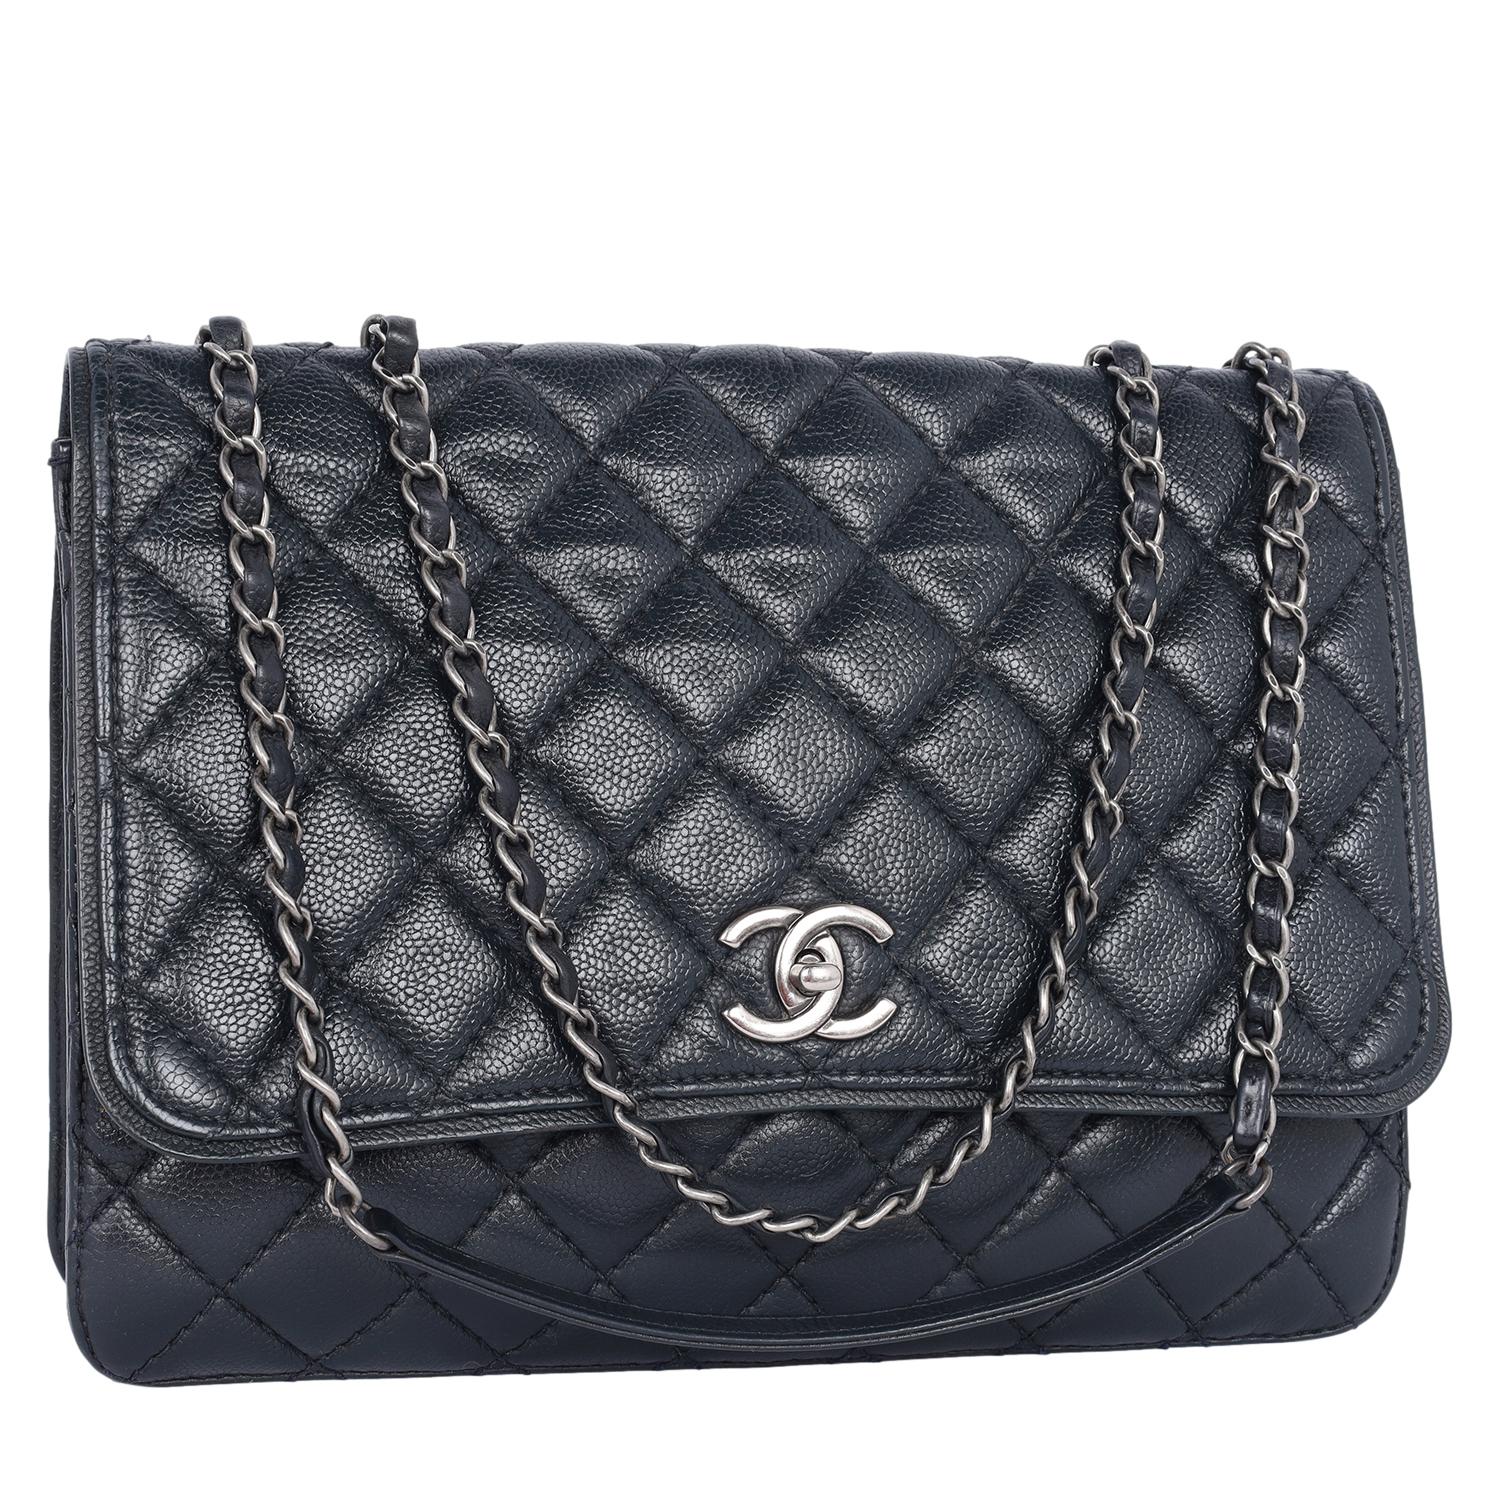 Authentic, pre-loved Chanel quilted Matelasse CC Logo Caviar shoulder bag in black. Features black quilted caviar leather, this luxurious, runway-ready bag features a woven-in leather chain strap and antique silver-tone hardware accents. Its CC